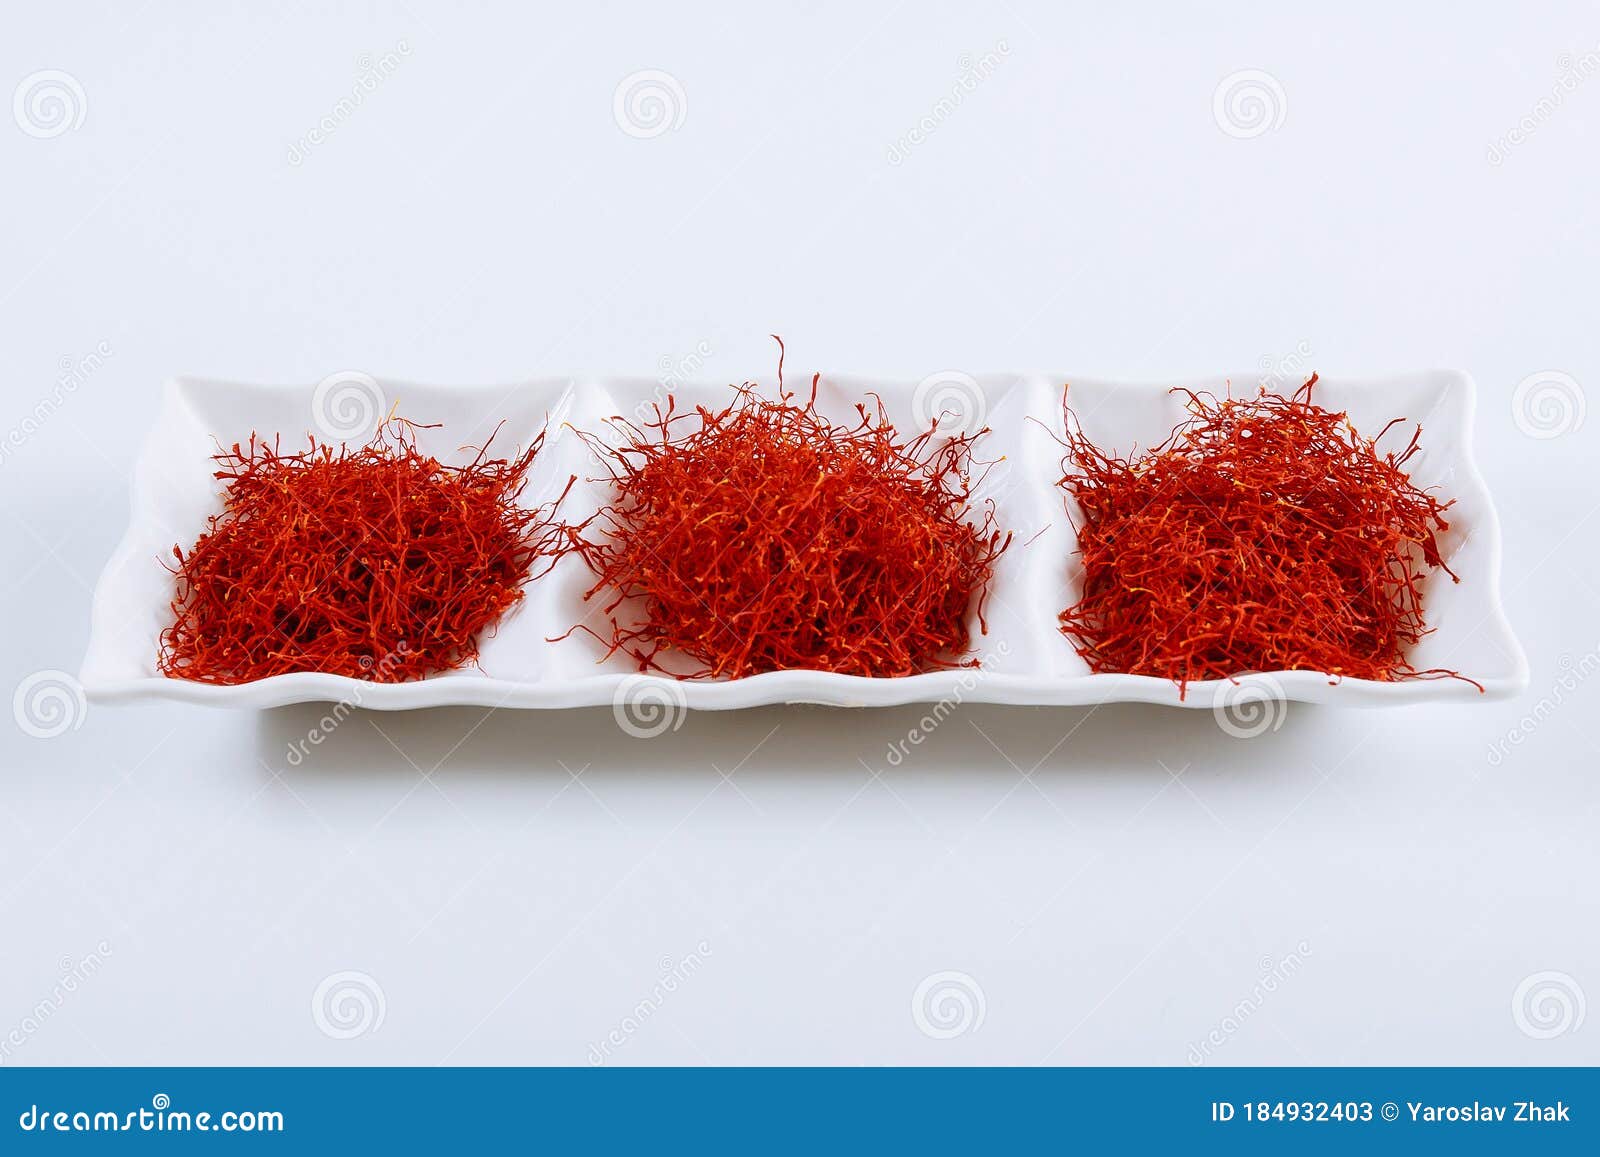 dry saffron spice on a white plate on white background